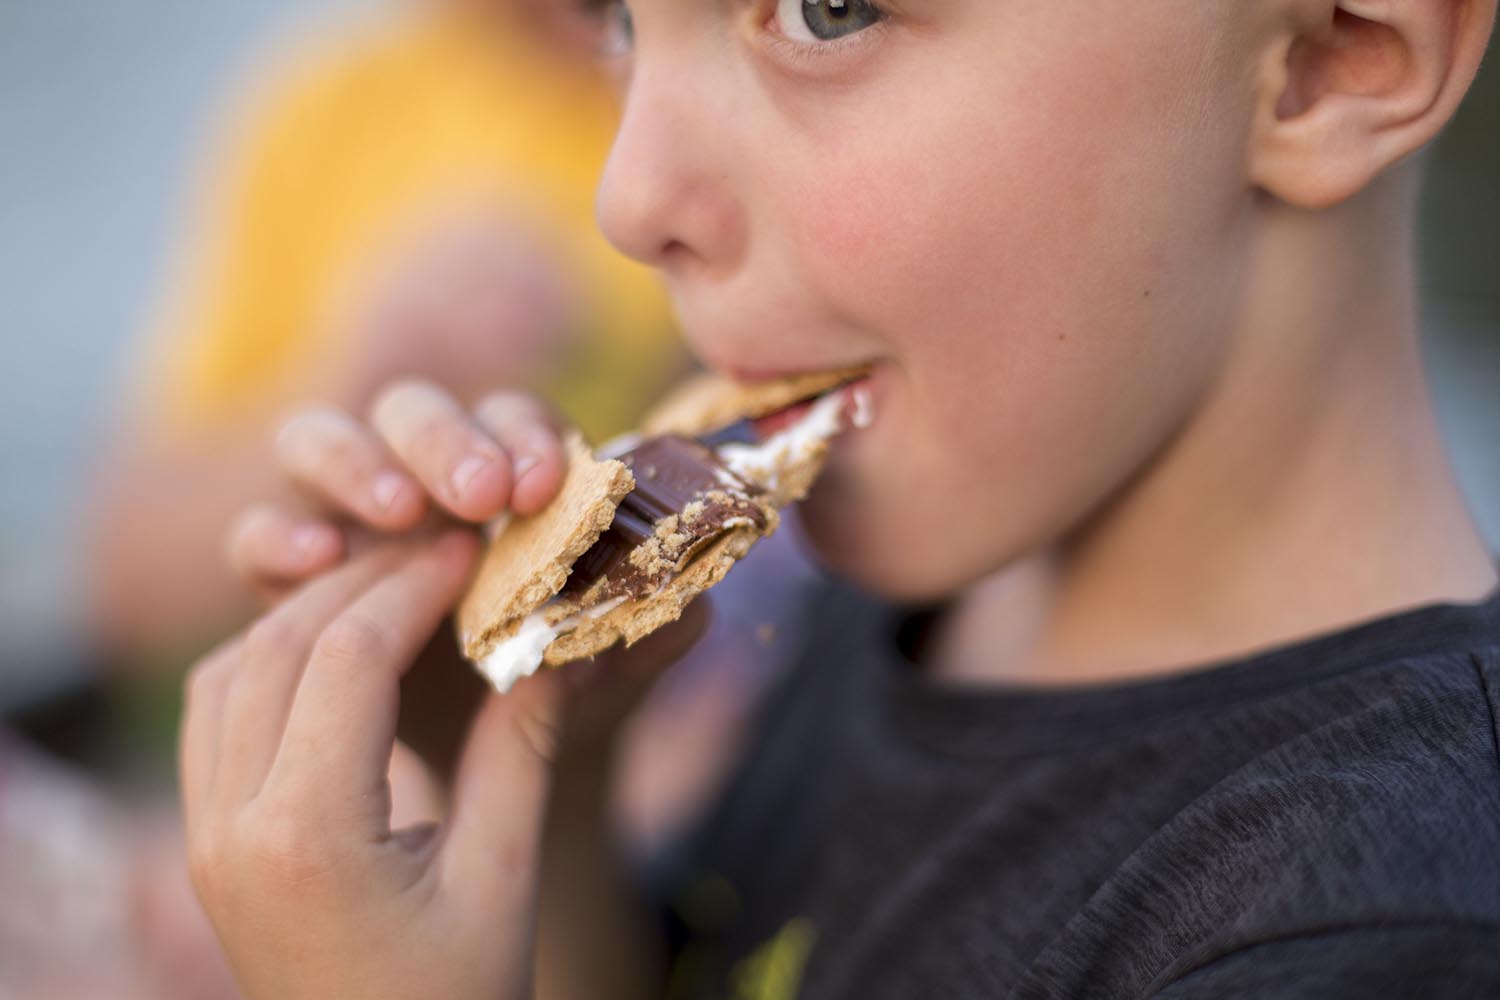 Young boy eating a s'mores